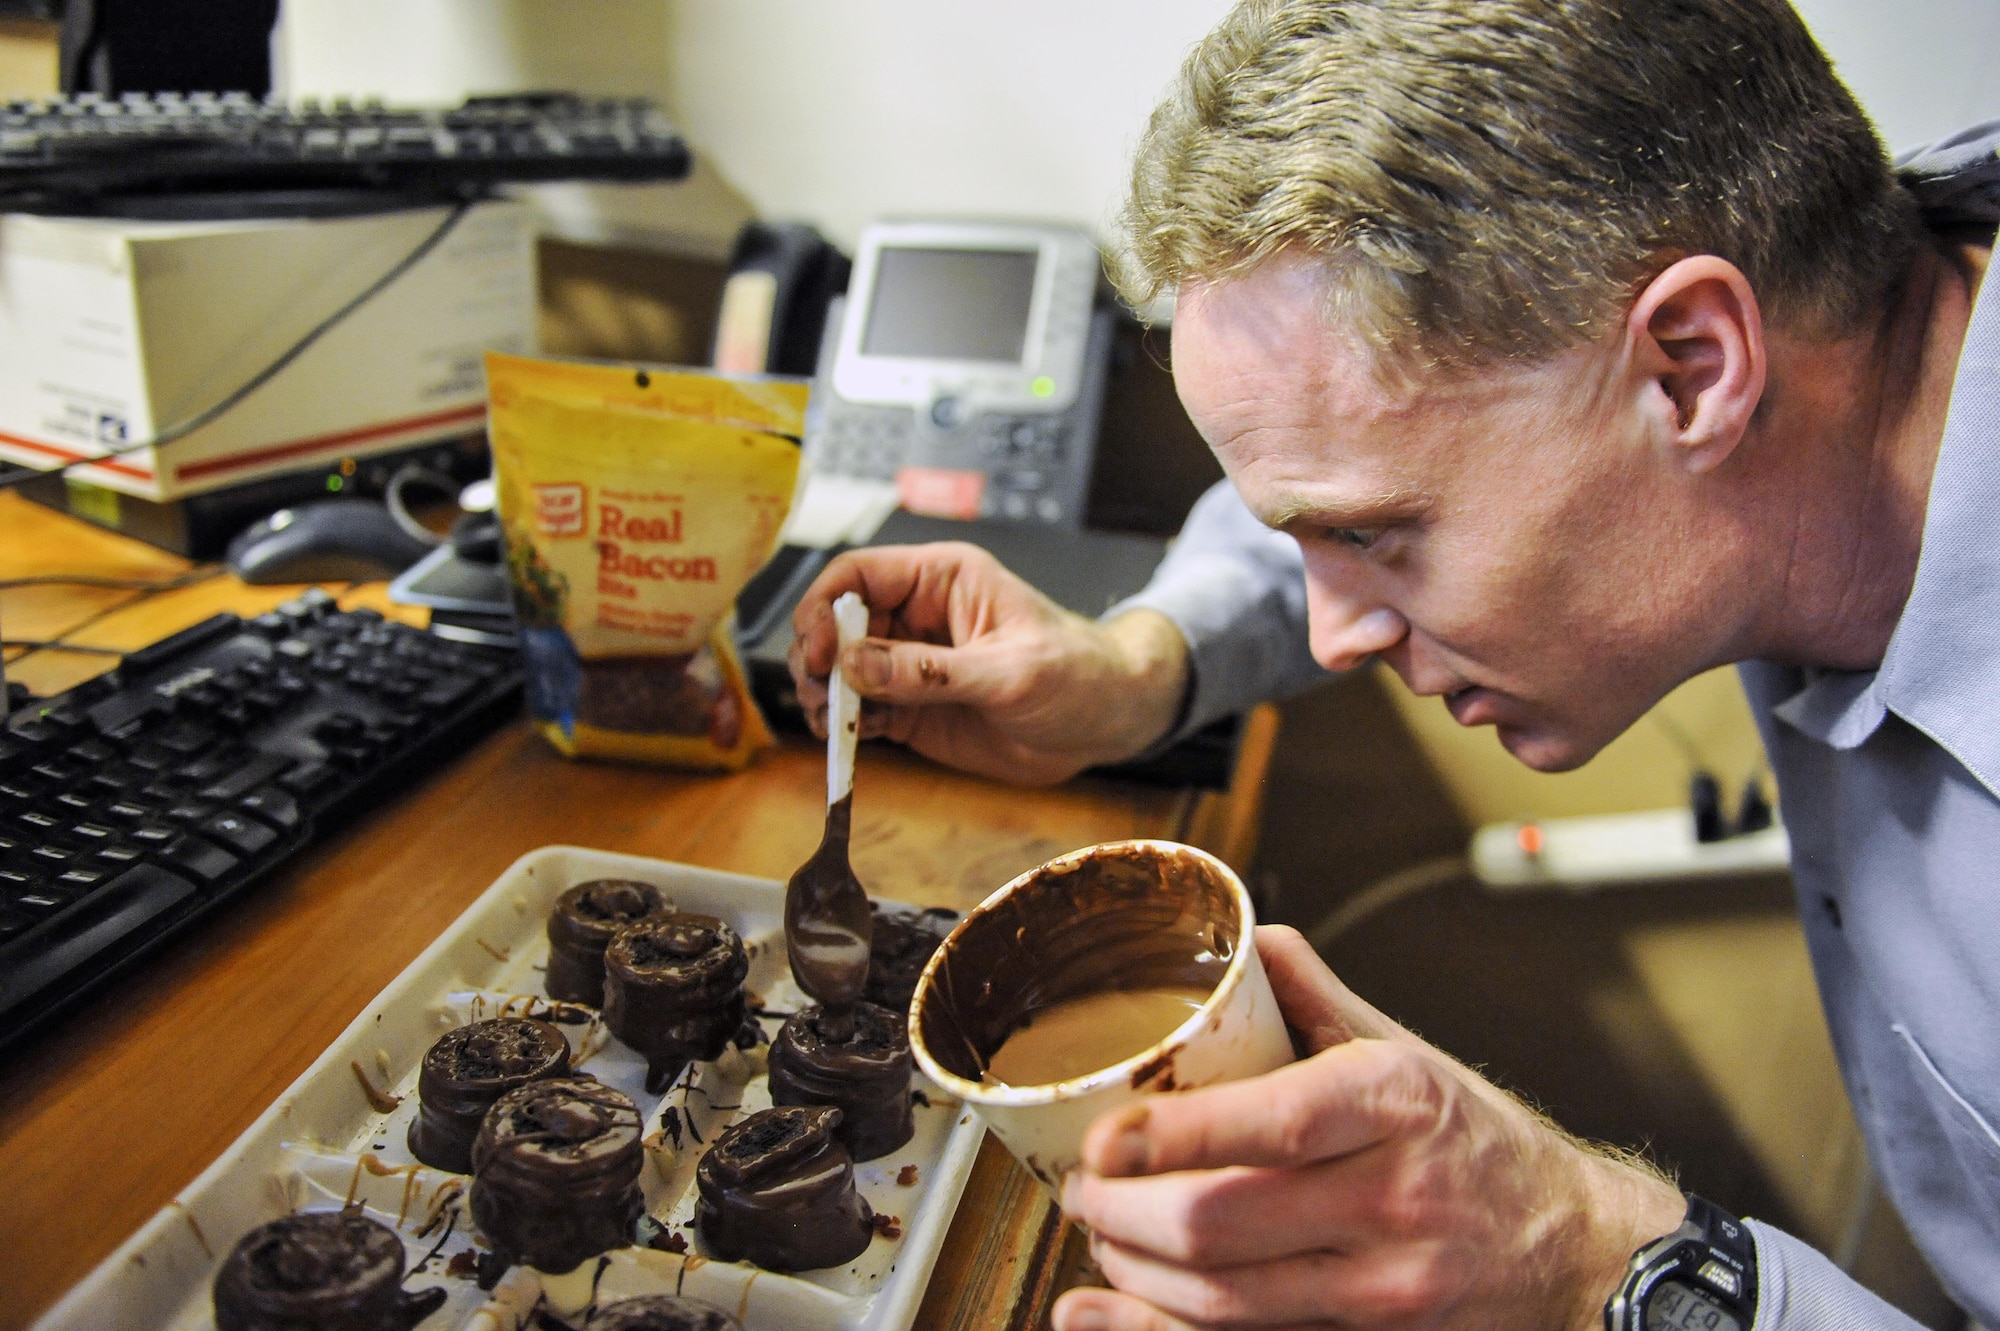 Dan Johnson, the 455th Expeditionary Mission Support Group contract augmentation program manager and treat maker, makes a batch of "Dead Elvis" at Bagram Airfield, Afghanistan, on Feb. 16, 2016. The "Dead Elvis" is a deployed confection created using peanut butter Oreos, bacon and chocolate. (U.S. Air Force photo/Tech. Sgt. Nicholas Rau)